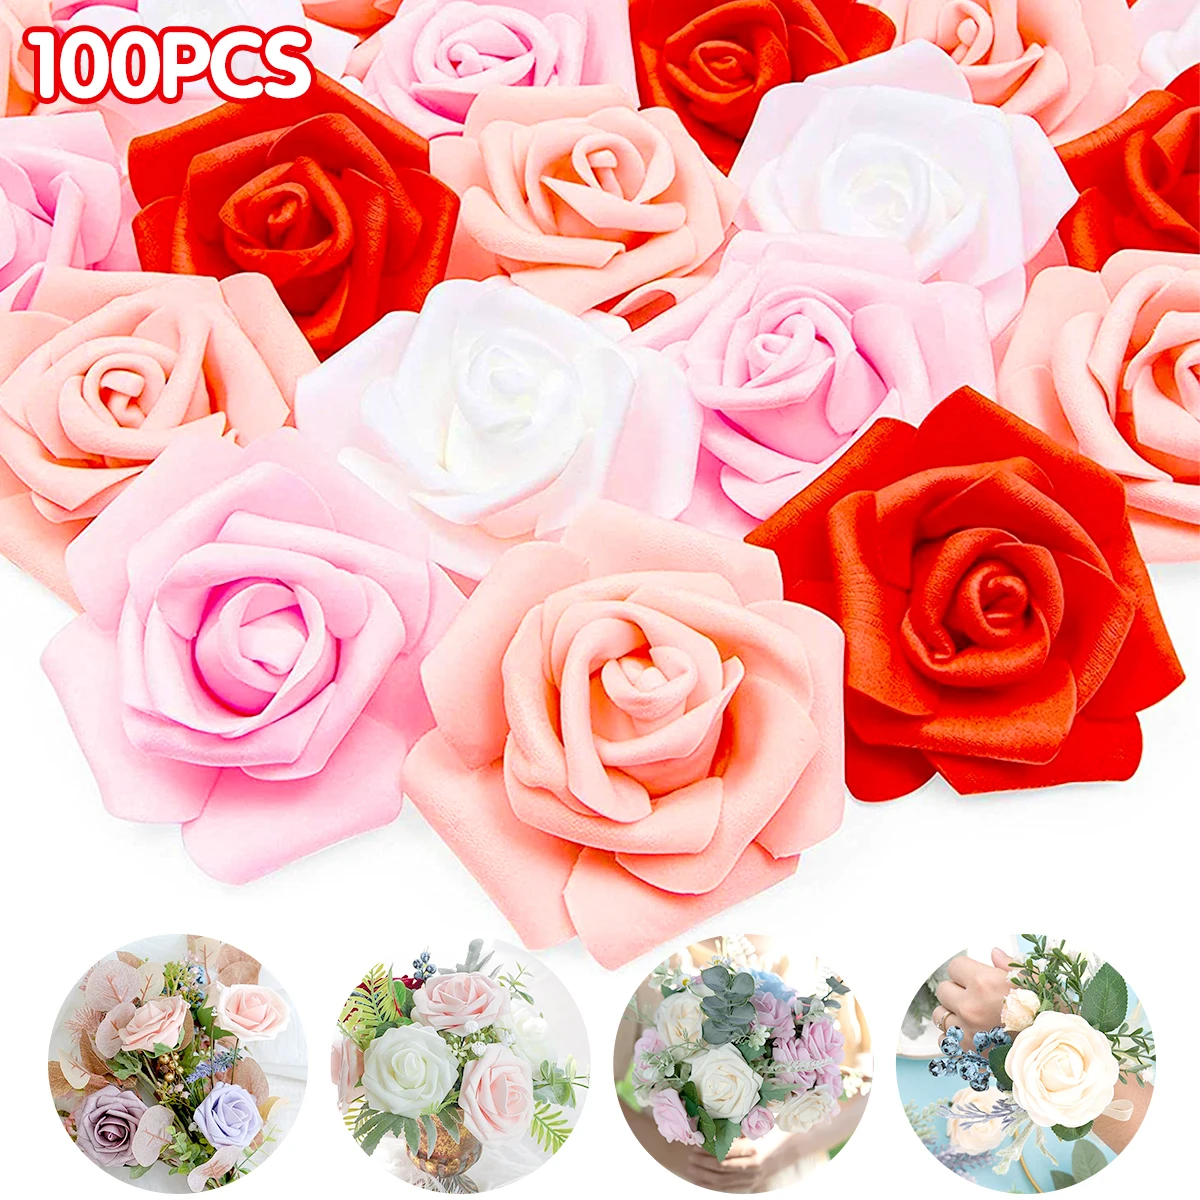 

100Pcs Artificial Flowers Roses Heads PE Foam Real Touch Fake Flower Garland DIY Decor Bride Wedding Bouquets Home Decorations